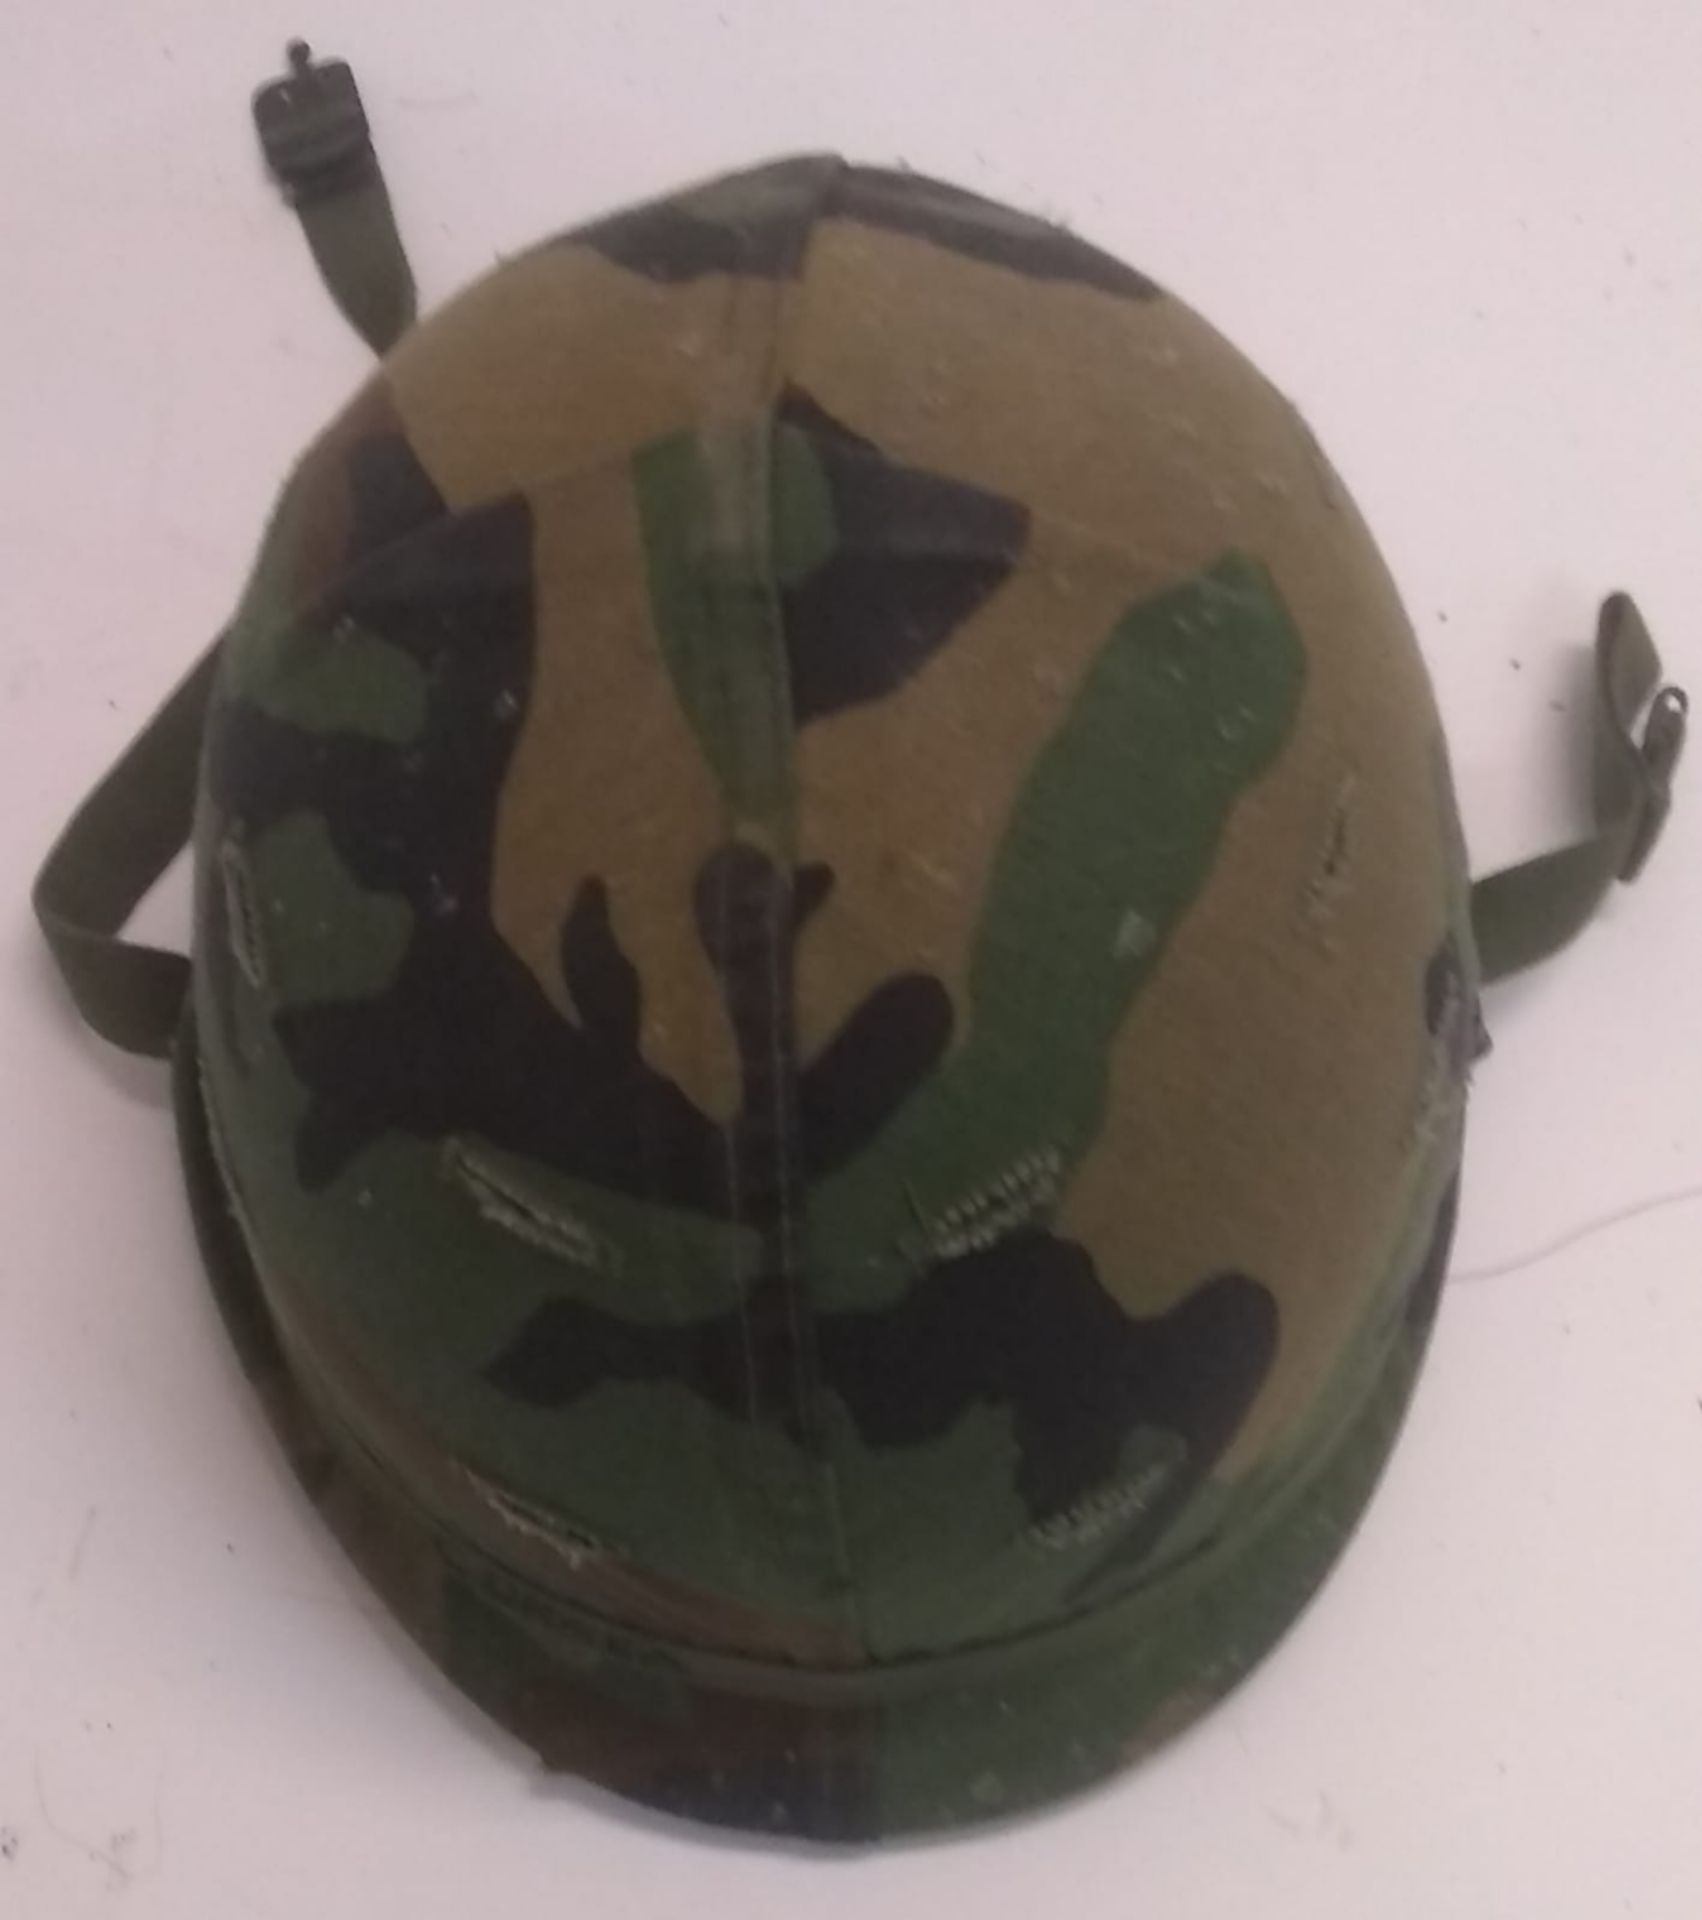 A US M1 Paratroopers helmet with crash p